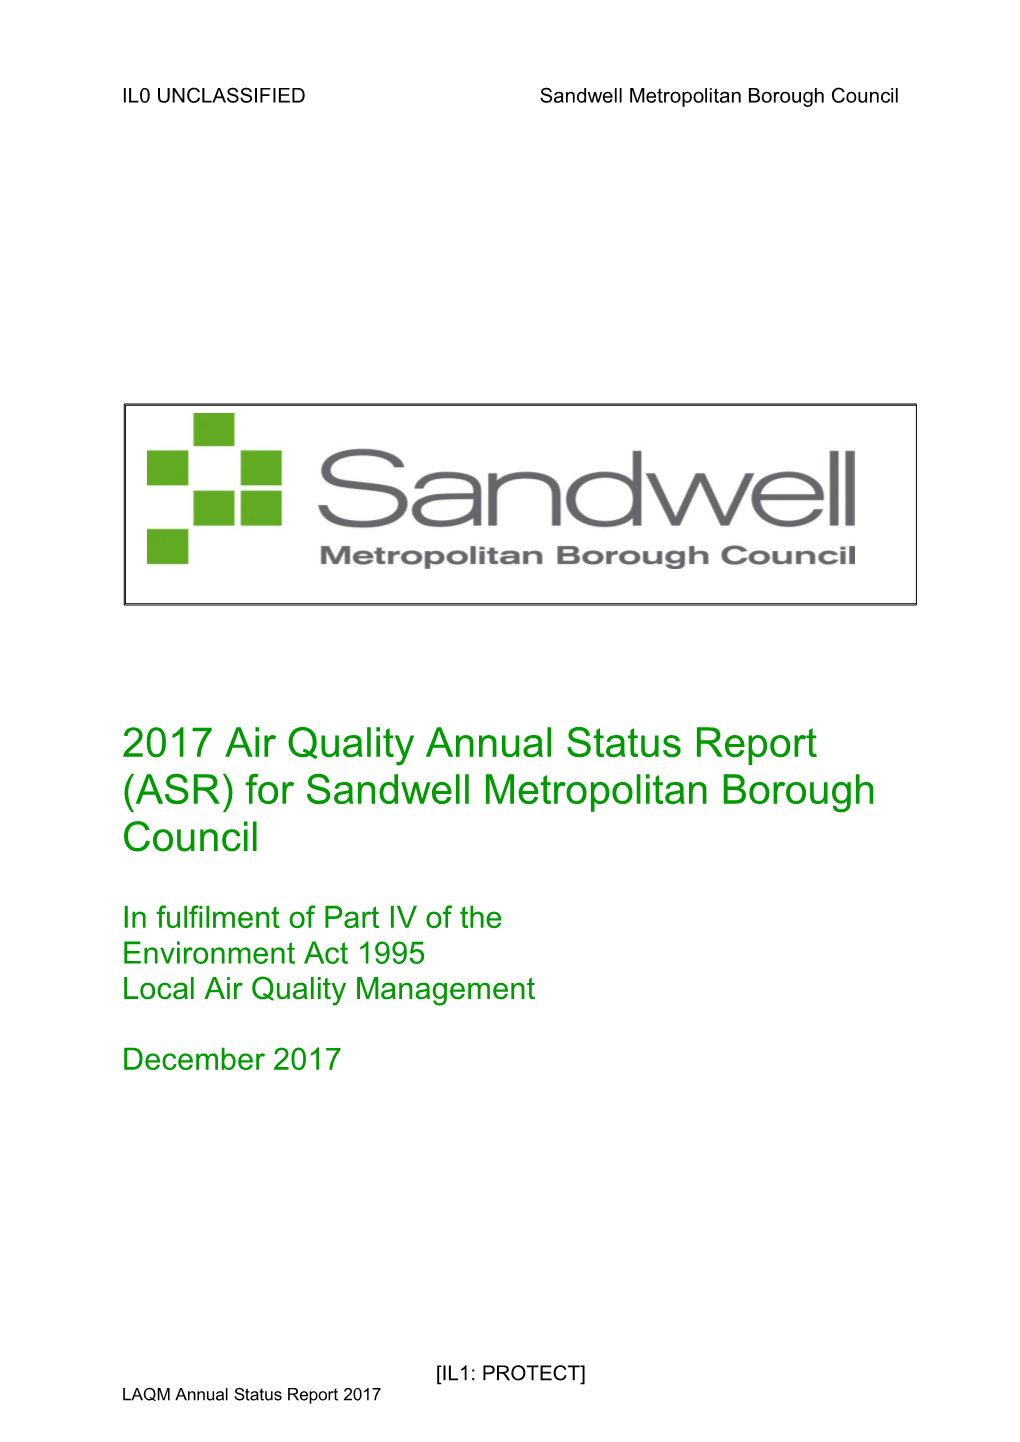 Air Quality in Sandwell